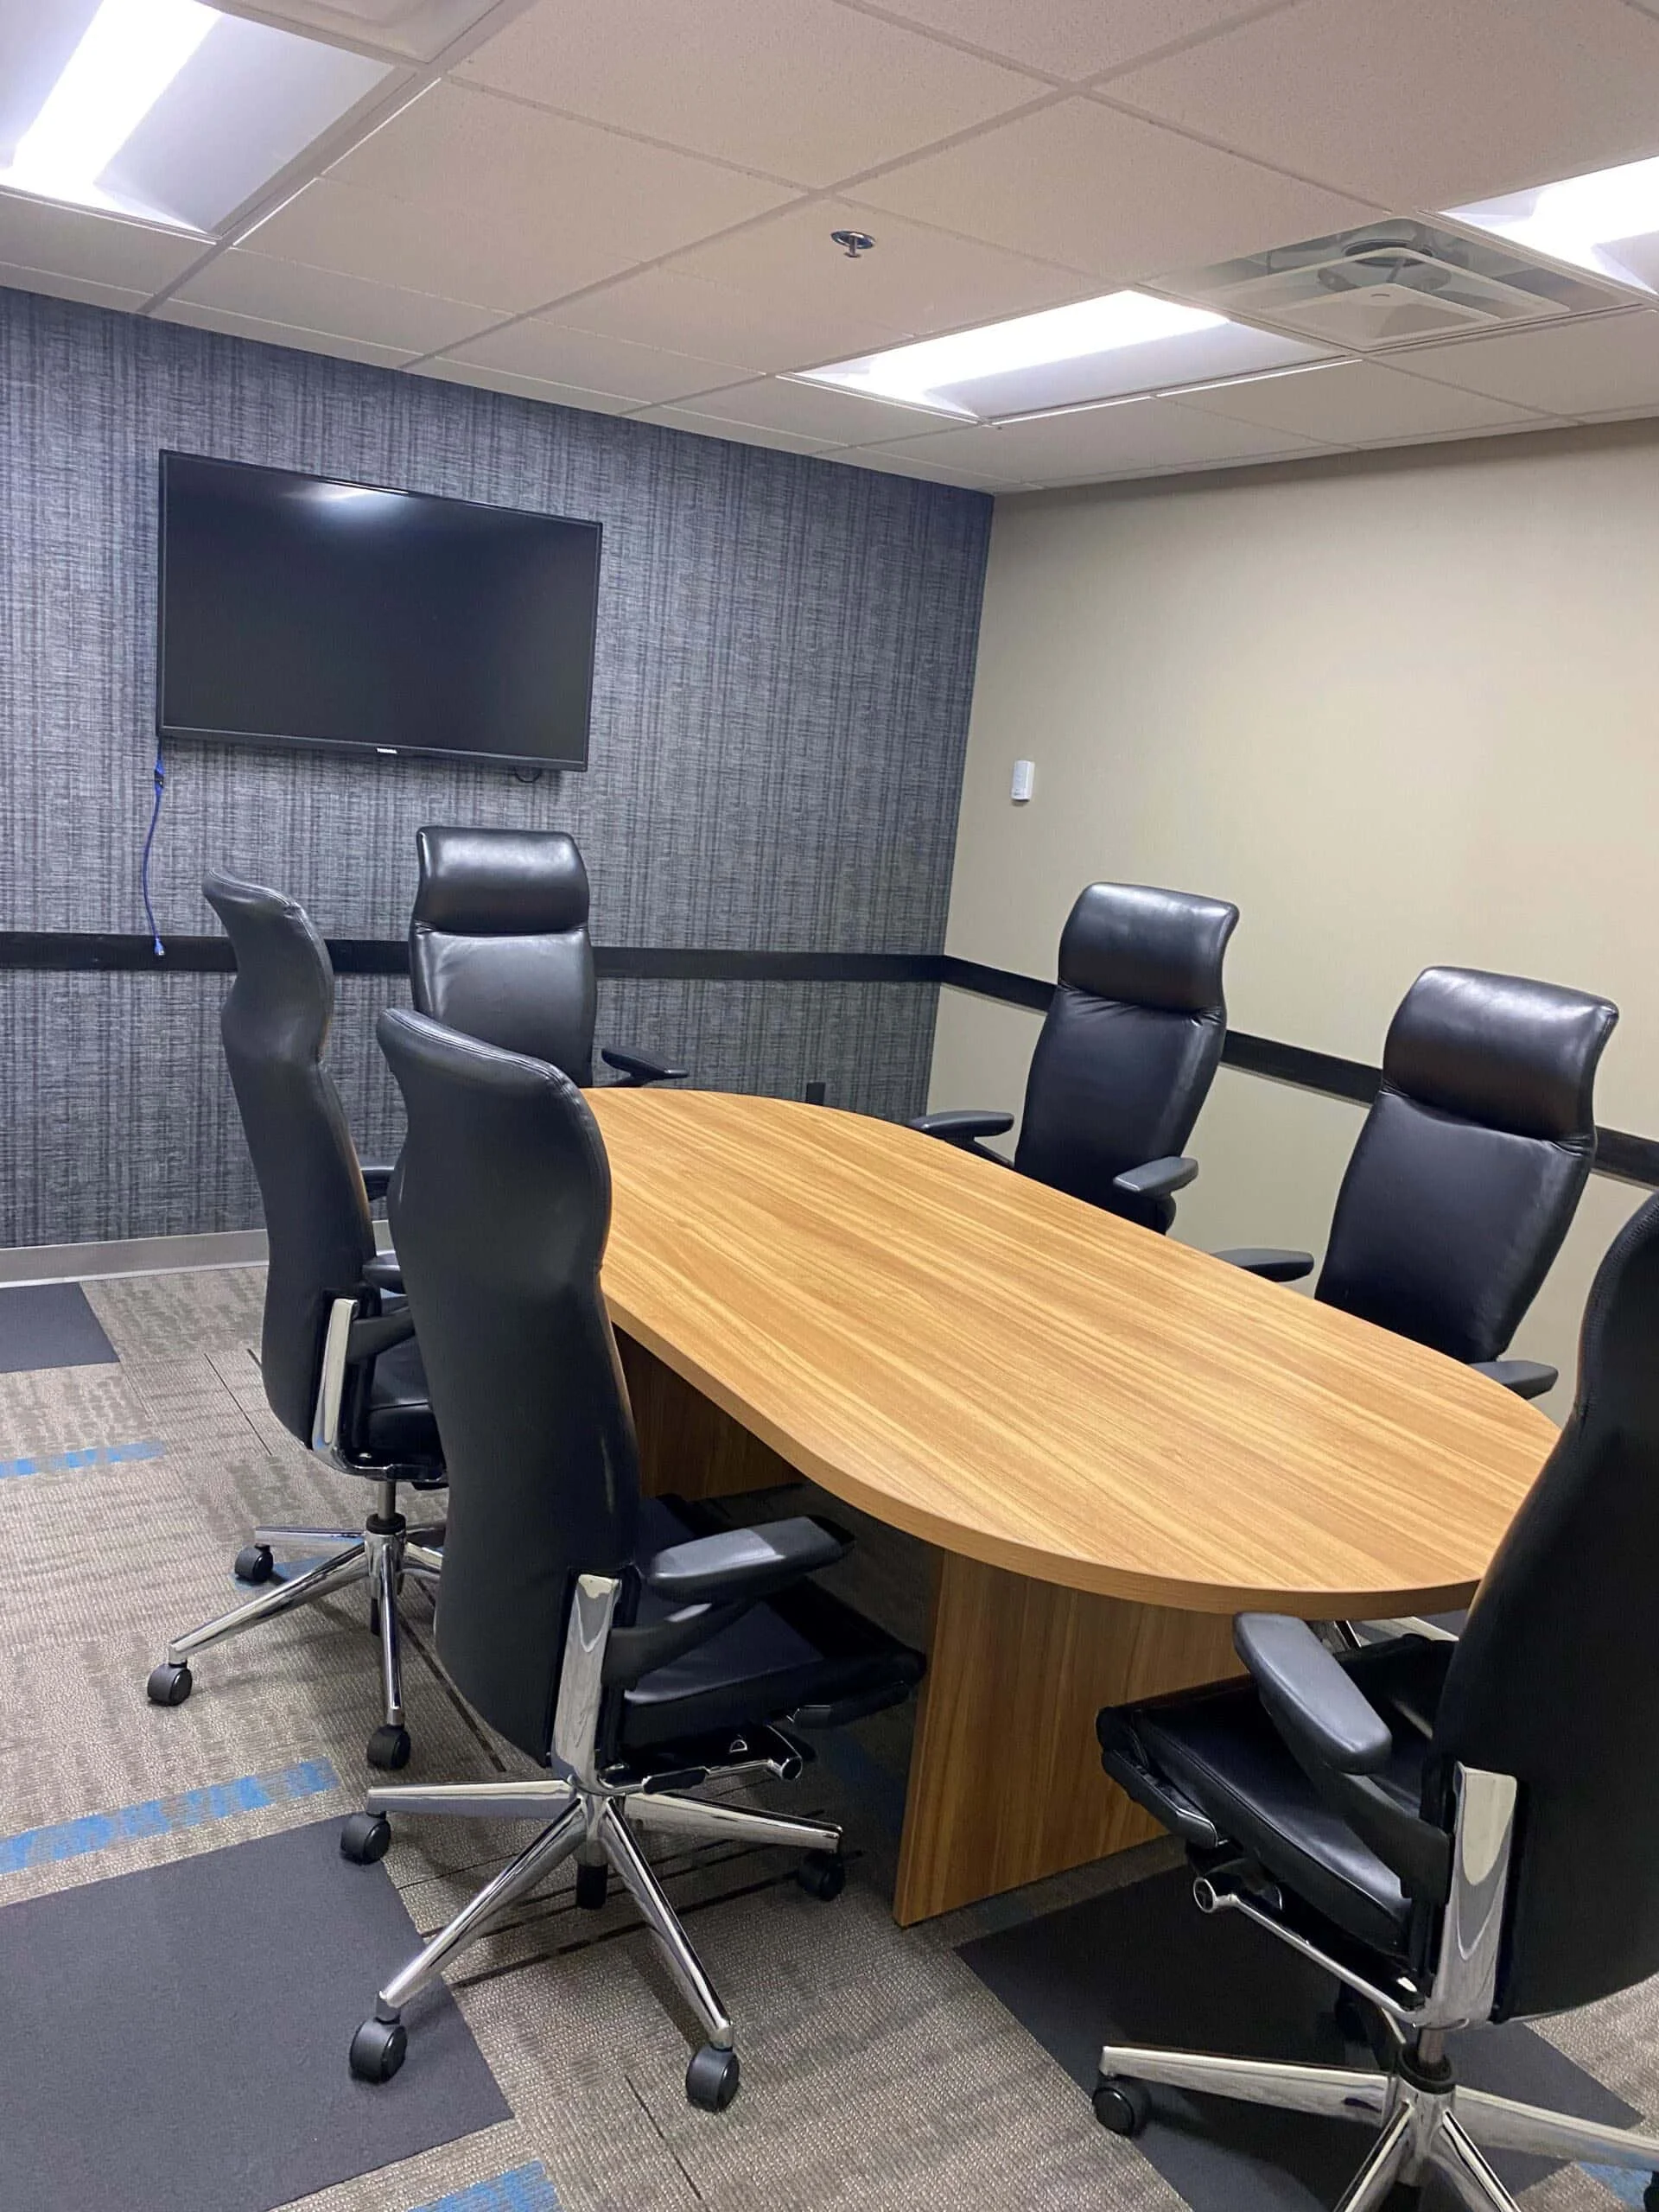 Beautifully Designed Large Conference Room - Perfect for Power Meetings & Collaborative Sessions. Book Now!